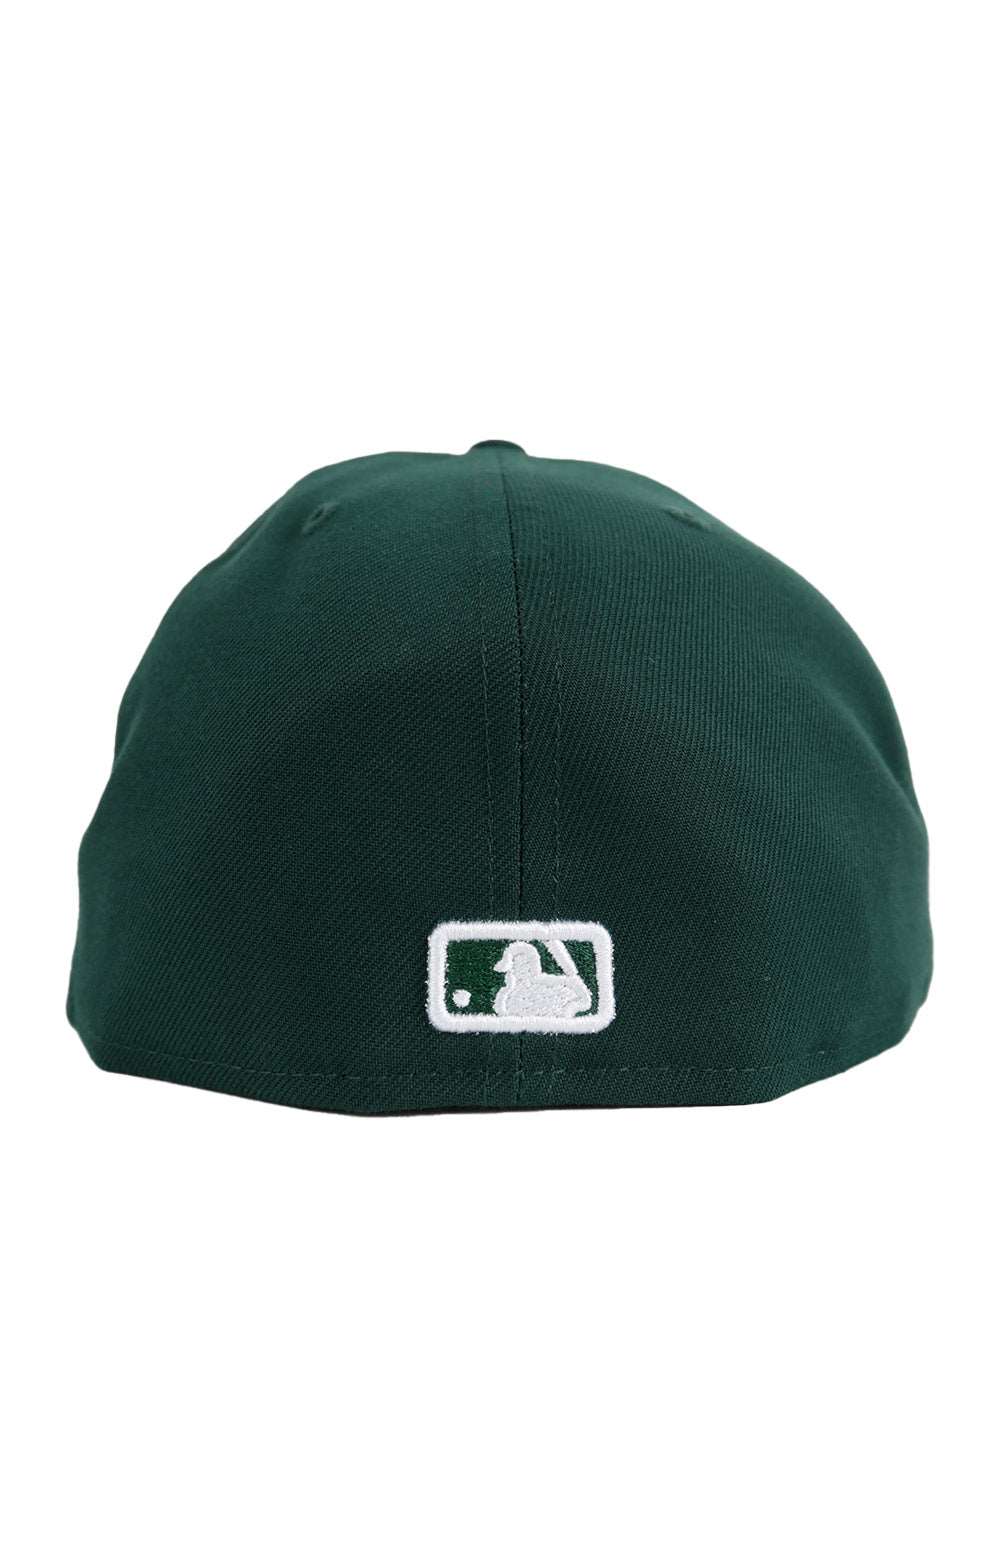 Chicago White Sox 59Fifty Fitted Hat - Dark Green